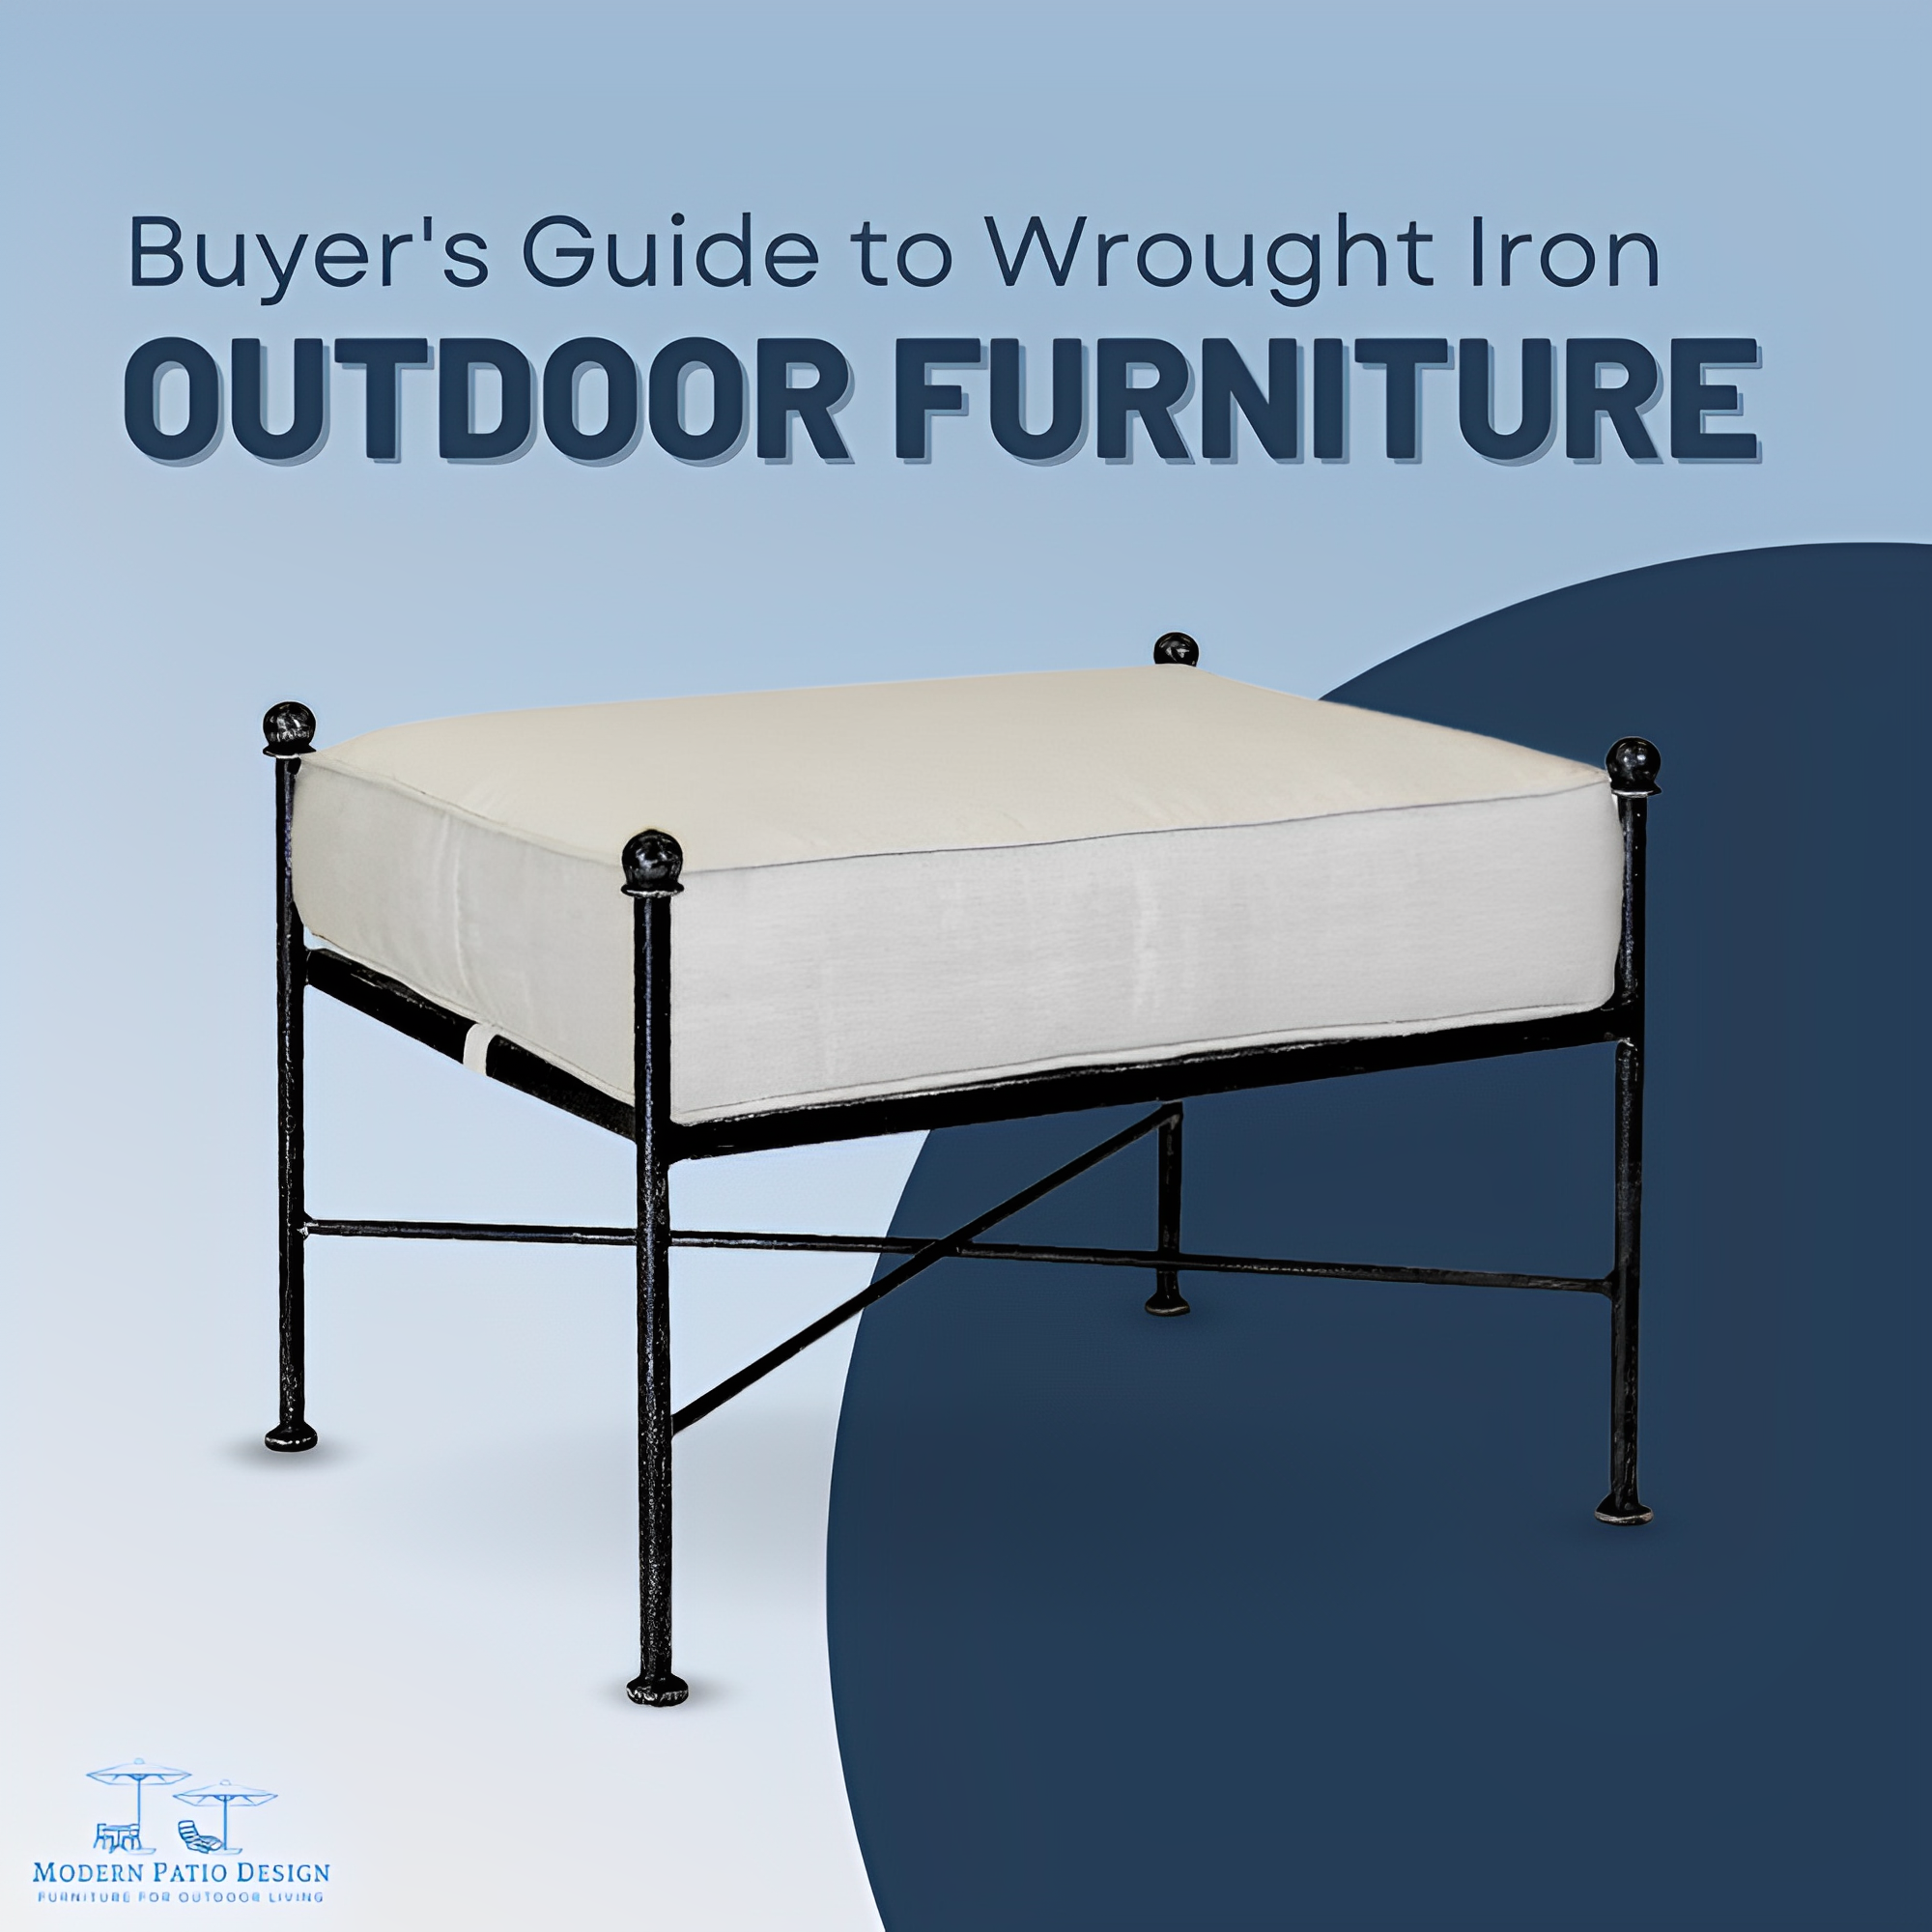 Wrought Iron Outdoor Furniture: Buyer’s Guide to Styles & Designs